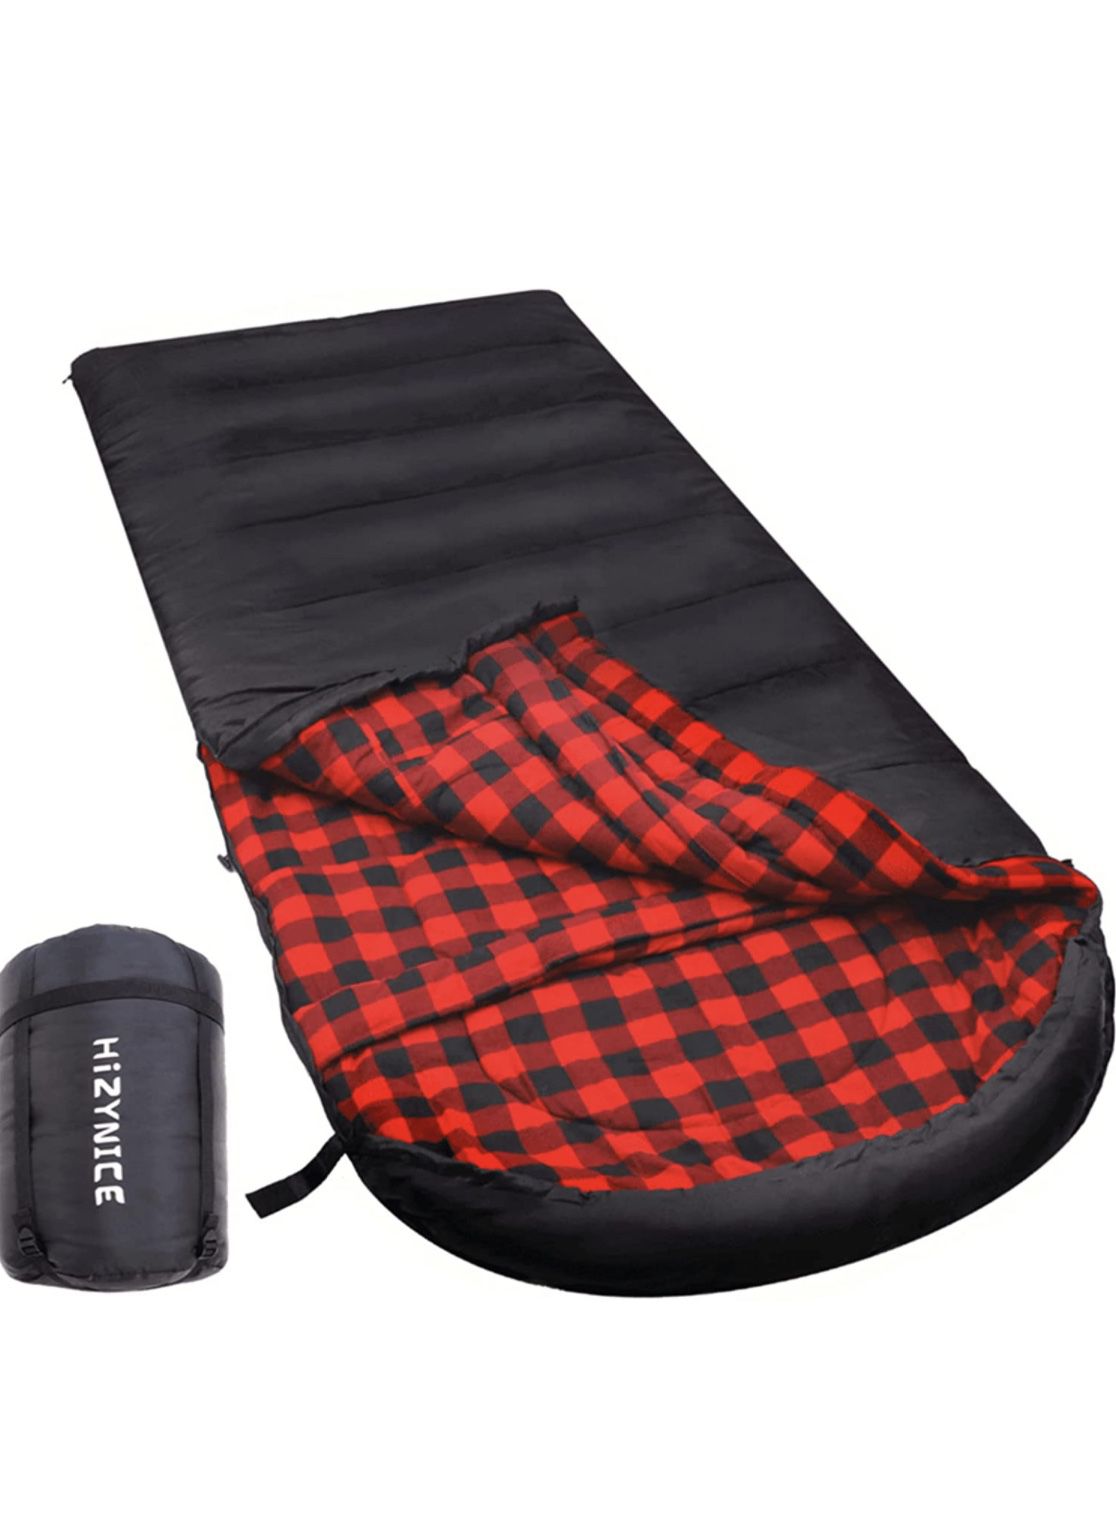 Sleeping Bag Cotton Flannel for Adults Big and Tall Cold Weather Winter Zero Degree Camping, Sack